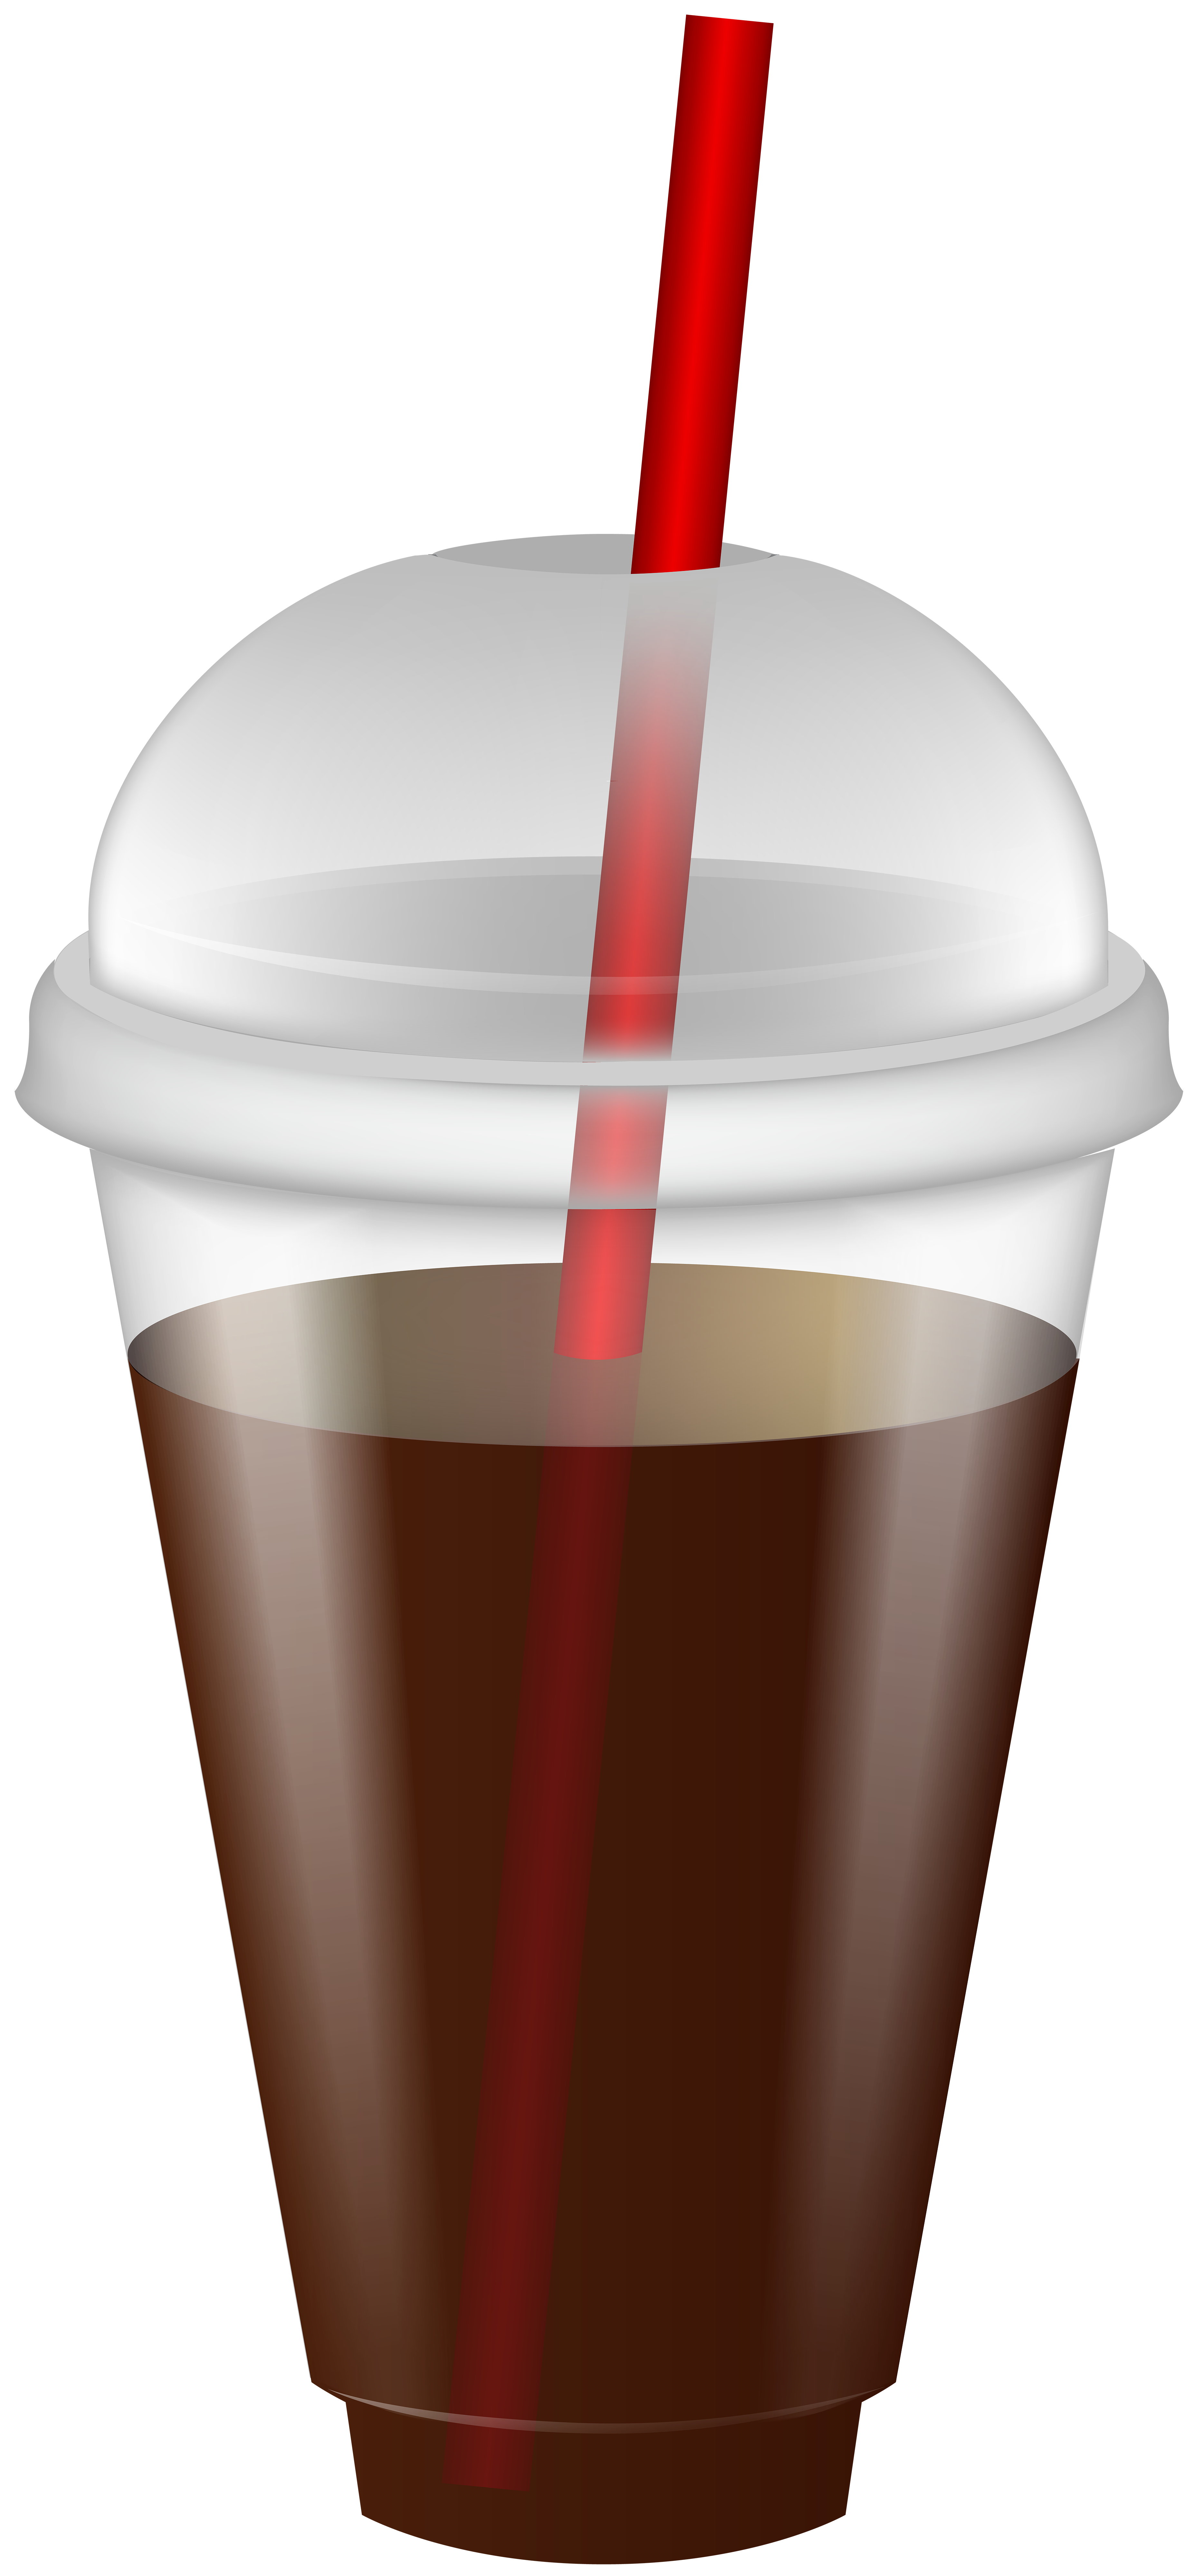 Drink in Plastic Cup with Straw PNG Clip Art Image.